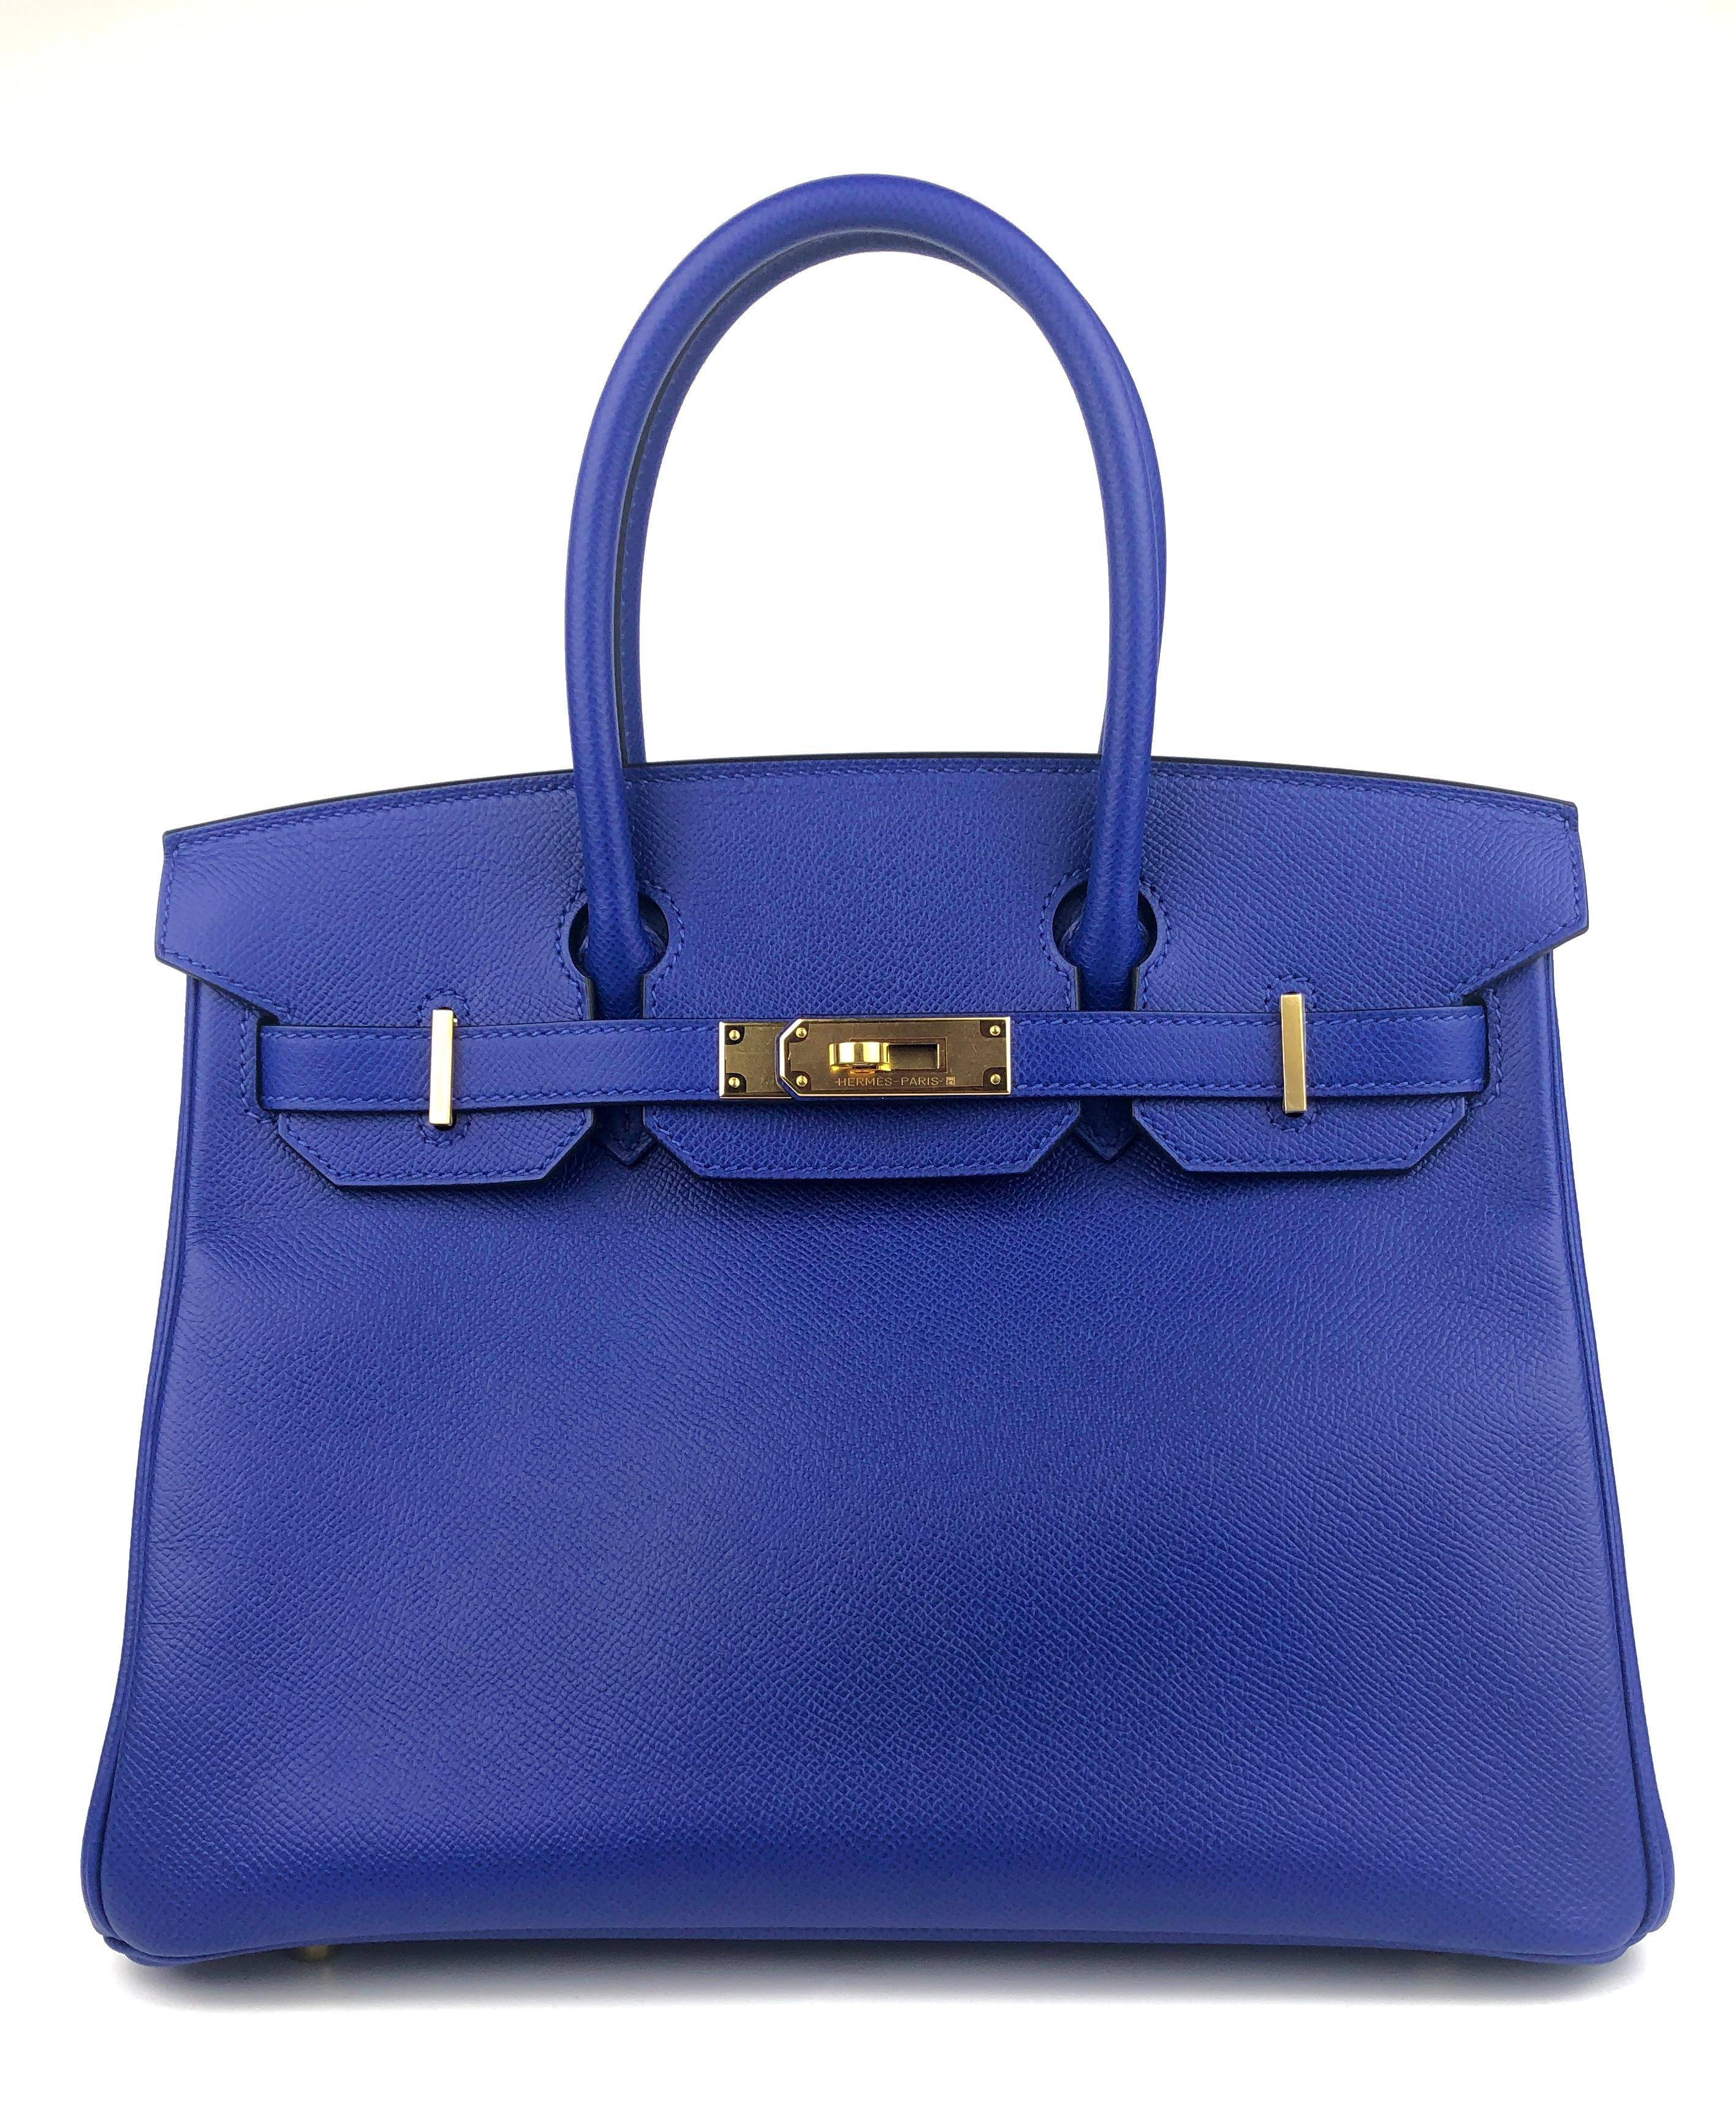 Pristine Hermes Birkin 30 Blue Electric Epsom Leather Gold Hardware. Pristine Almost As New Condition with Plastic on Hardware. D Stamp 2019. 

Shop with Confidence from Lux Addicts. Authenticity Guaranteed! 